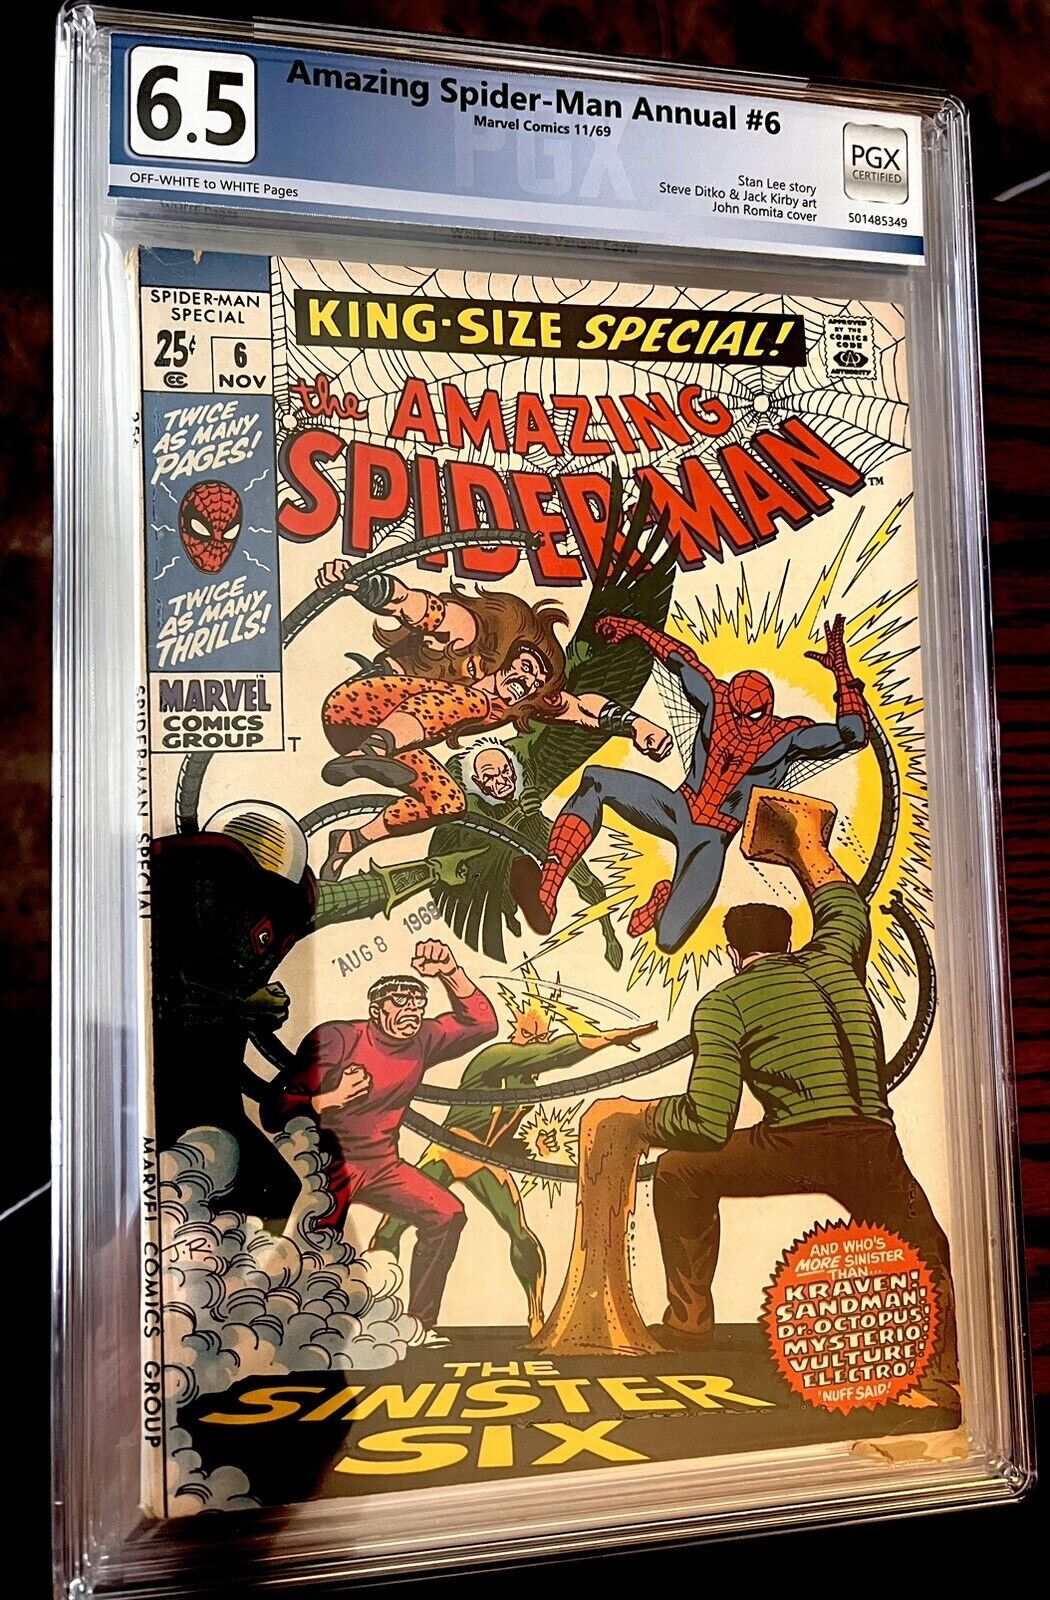 Amazing Spider-man Annual #6 (PGX 6.5) Classic Sinister Six